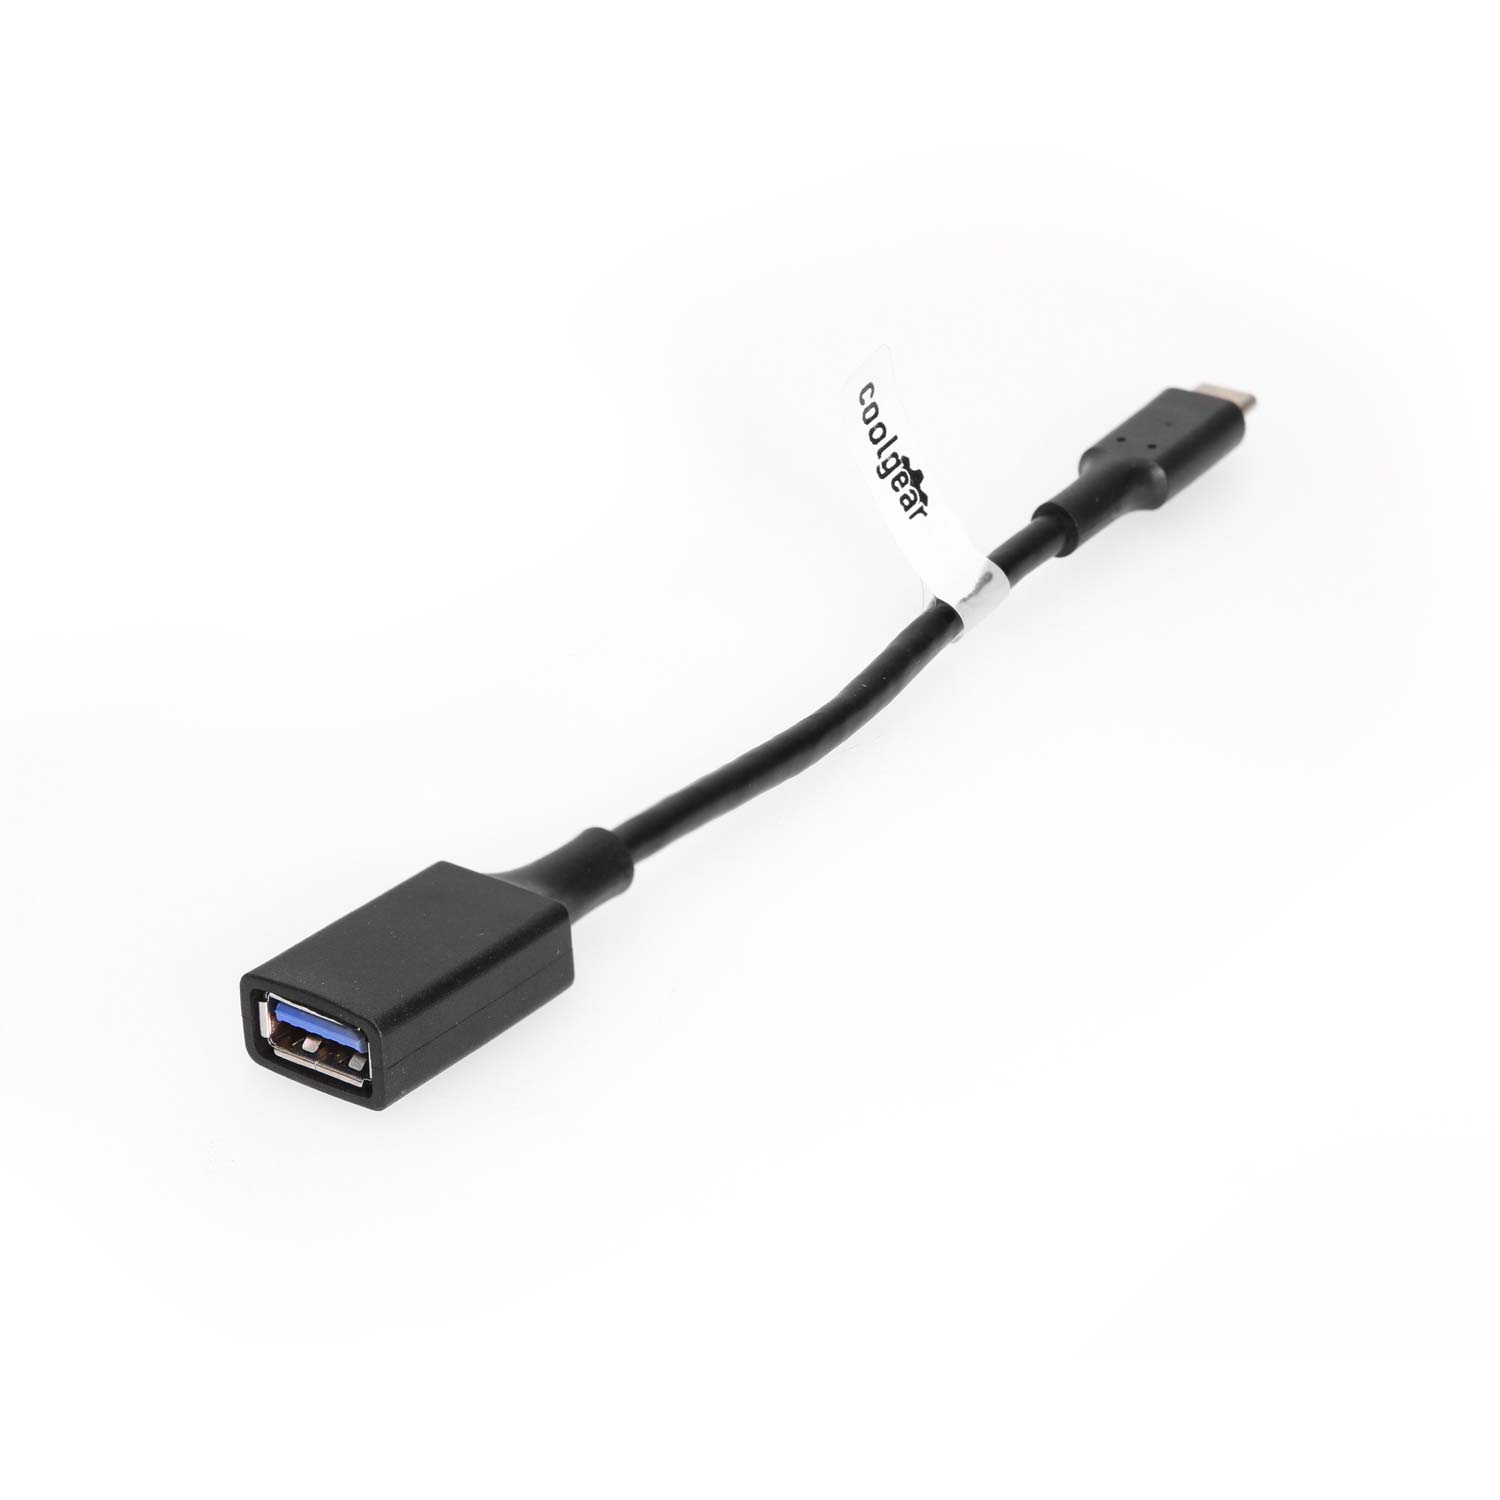 OTG Adapter Cable - USB Type C Male To USB Type A Female